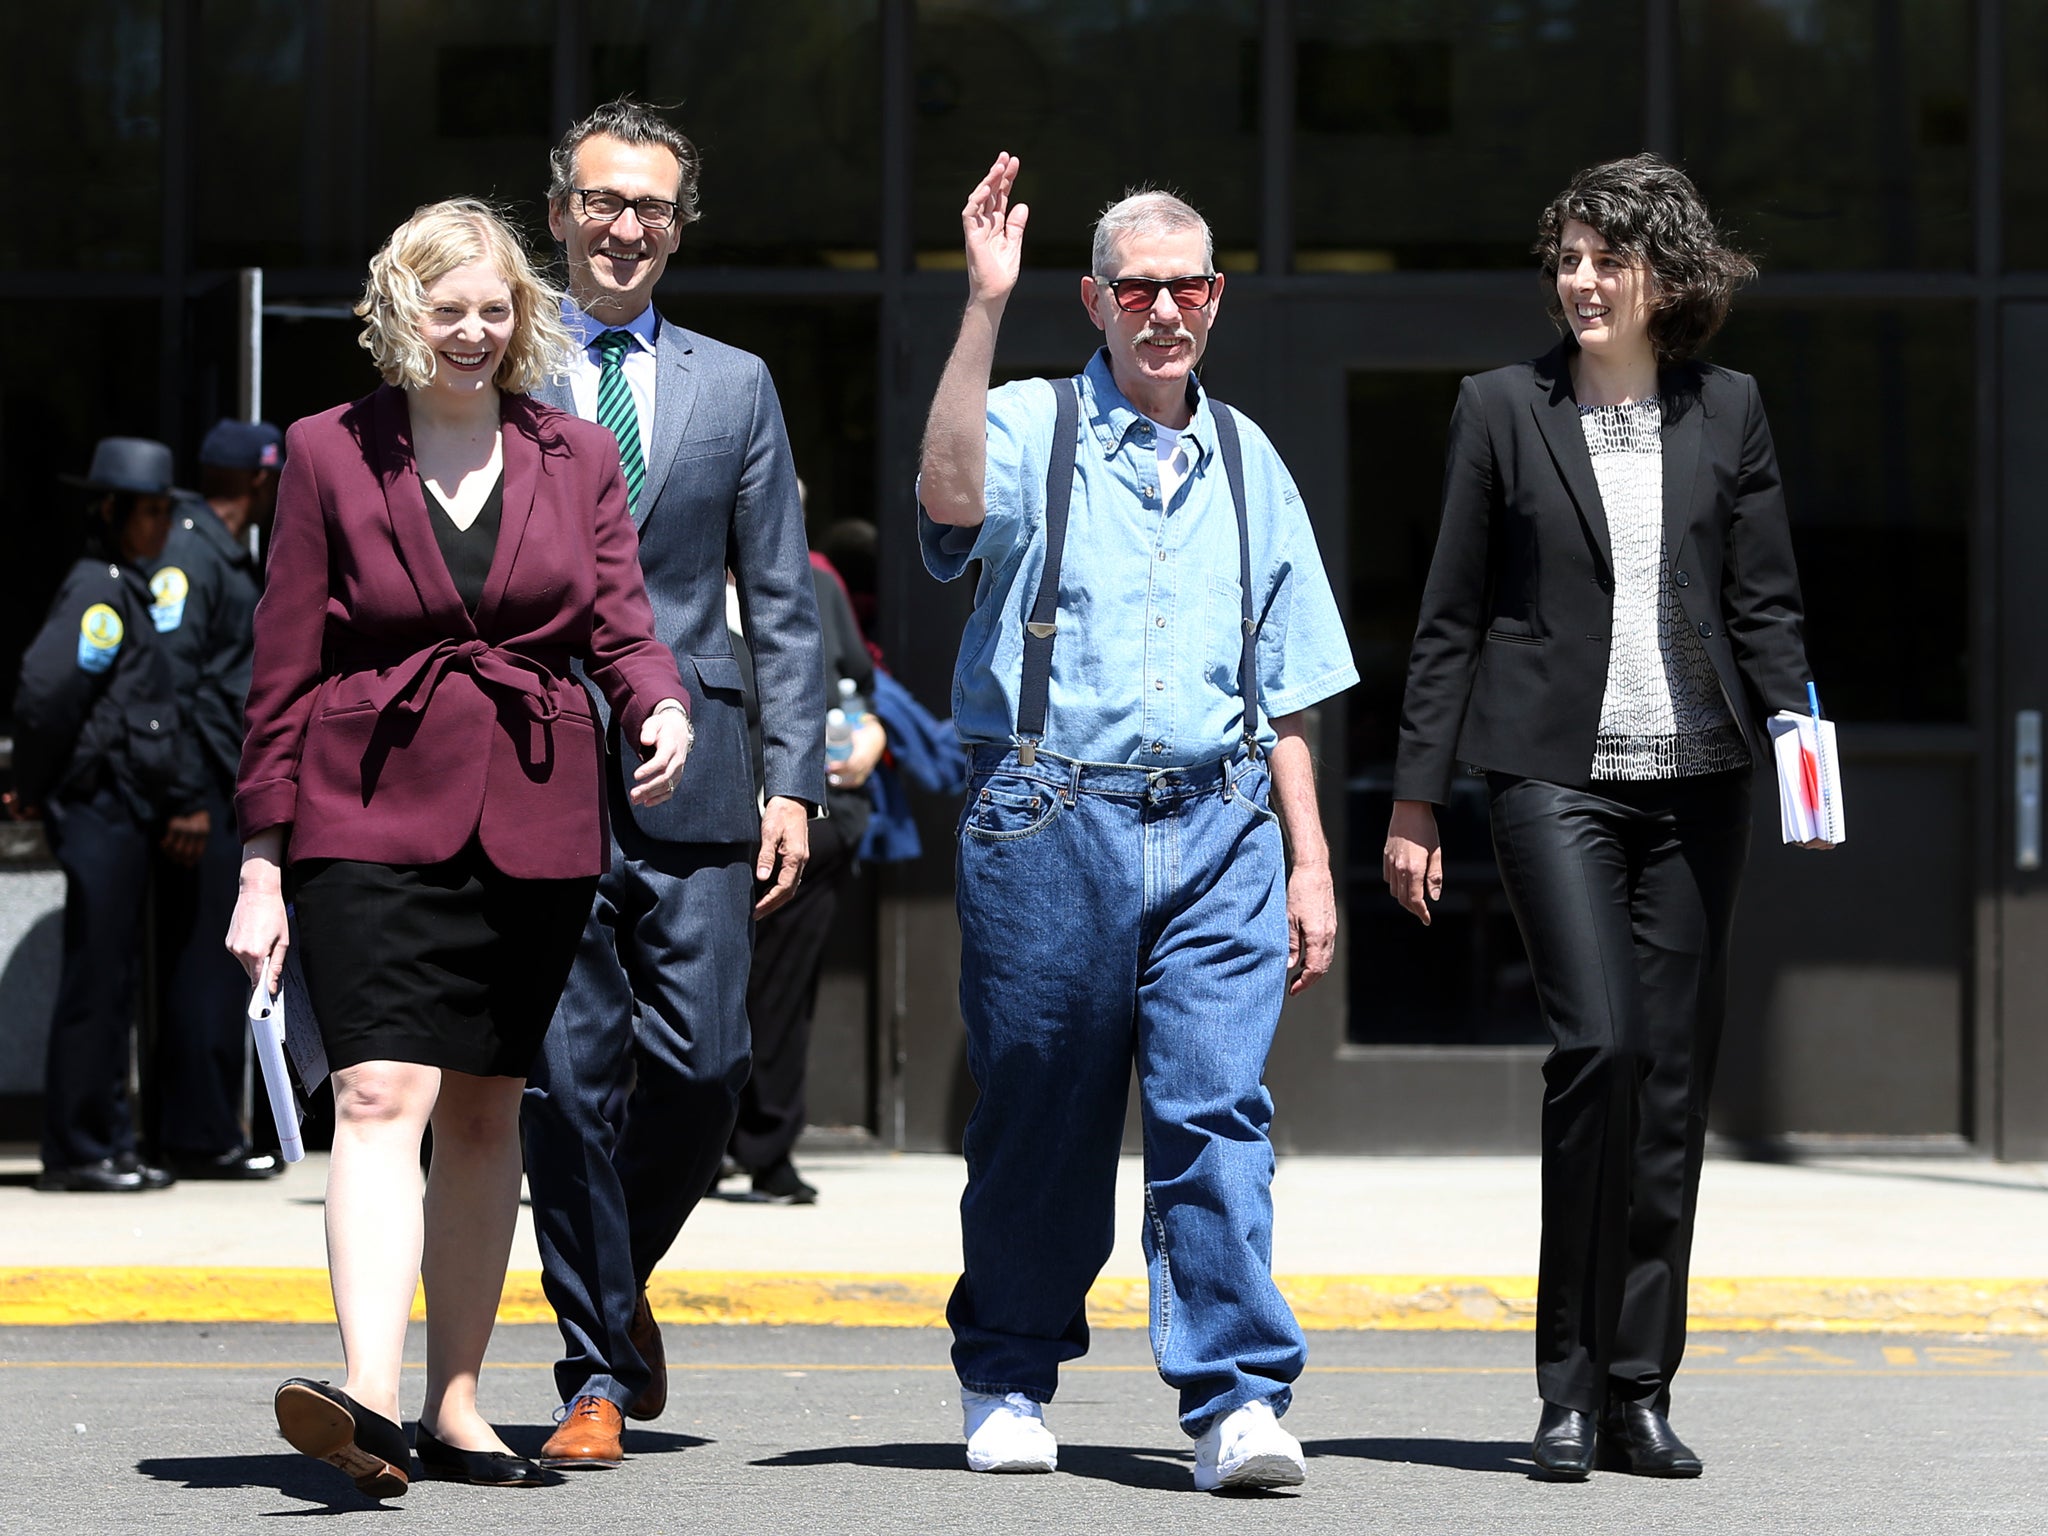 Keith Allen Harward walks out of the Nottoway Correctional Center with his attorneys AP